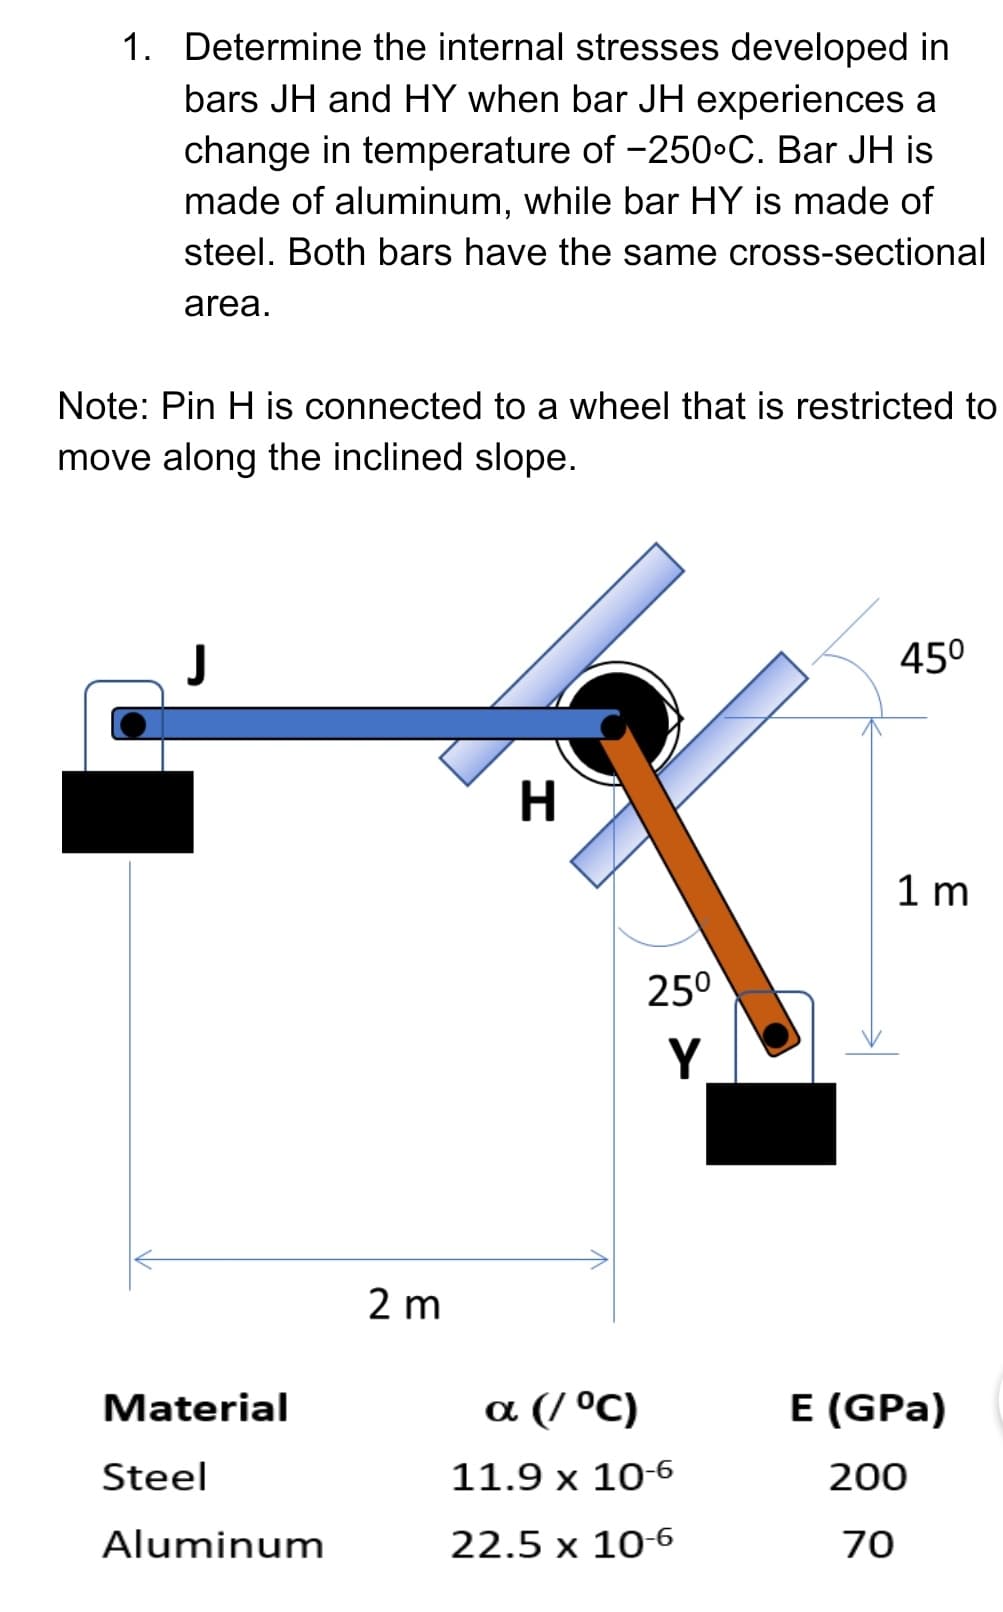 1. Determine the internal stresses developed in
bars JH and HY when bar JH experiences a
change in temperature of -250•C. Bar JH is
made of aluminum, while bar HY is made of
steel. Both bars have the same cross-sectional
area.
Note: Pin H is connected to a wheel that is restricted to
move along the inclined slope.
J
450
H
1 m
250
Y
2 m
Material
a (/°С)
E (GPa)
Steel
11.9 x 10-6
200
Aluminum
22.5 x 10-6
70
